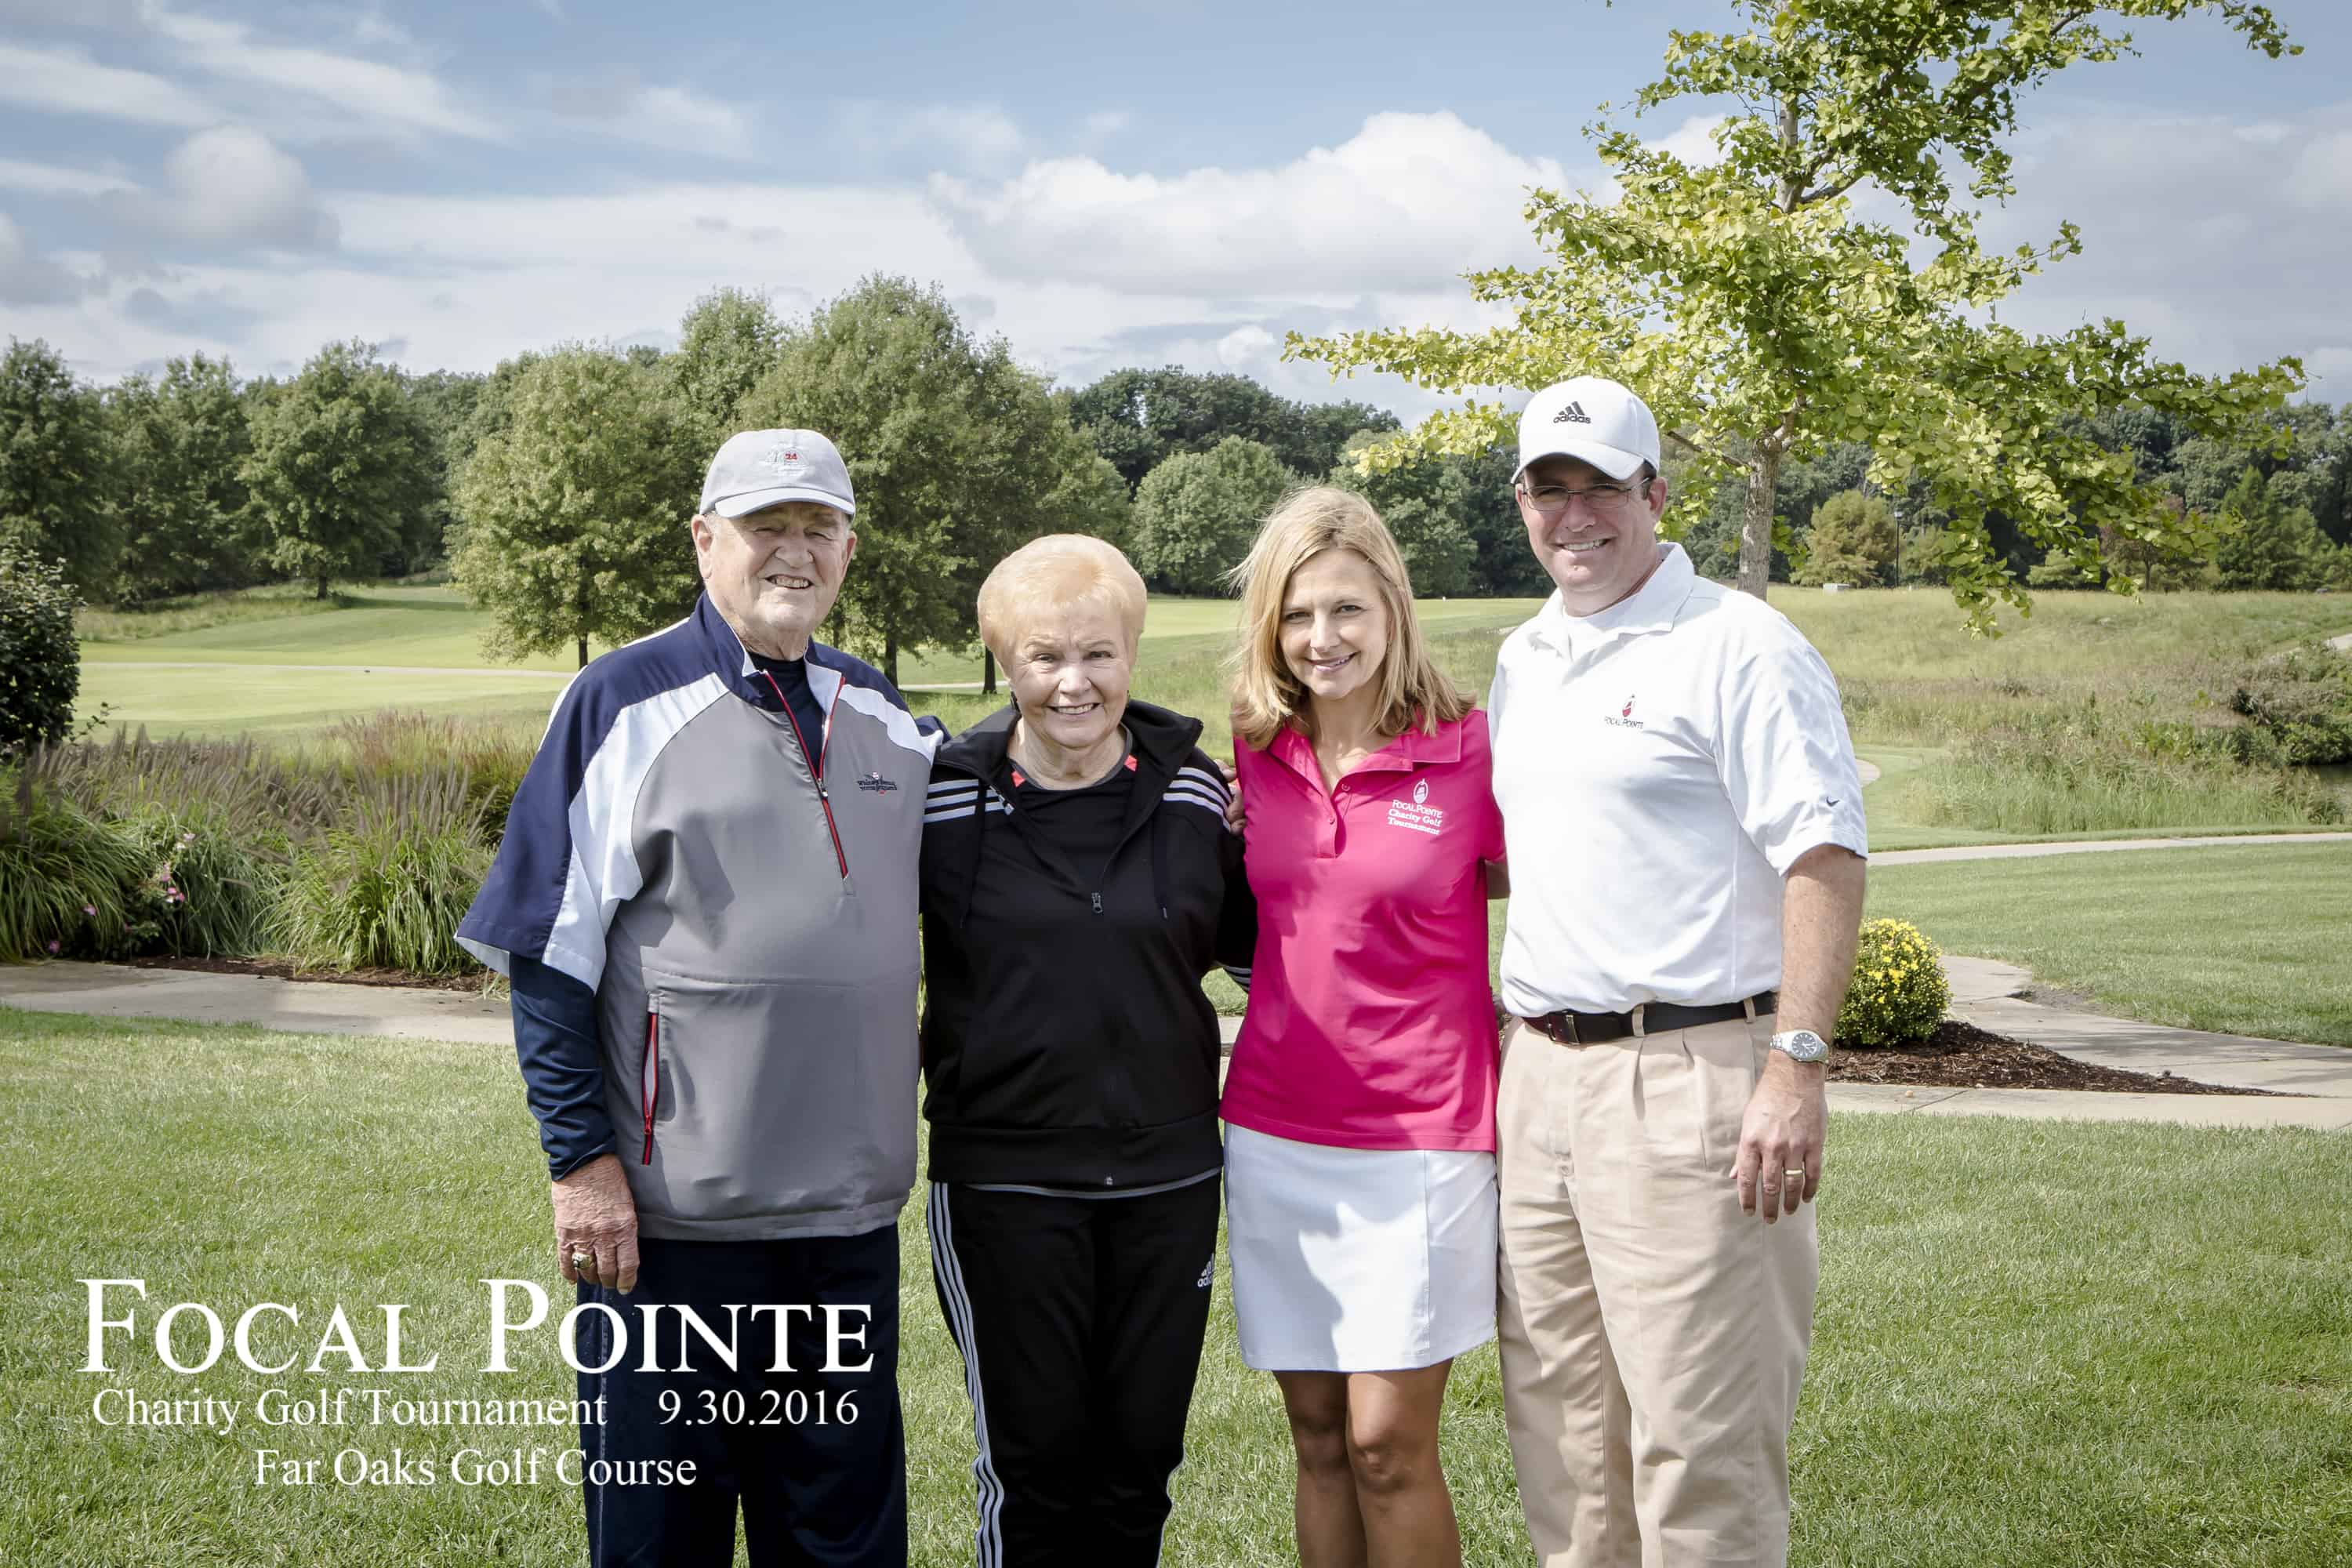 Focal Pointe Charity Golf Tournament